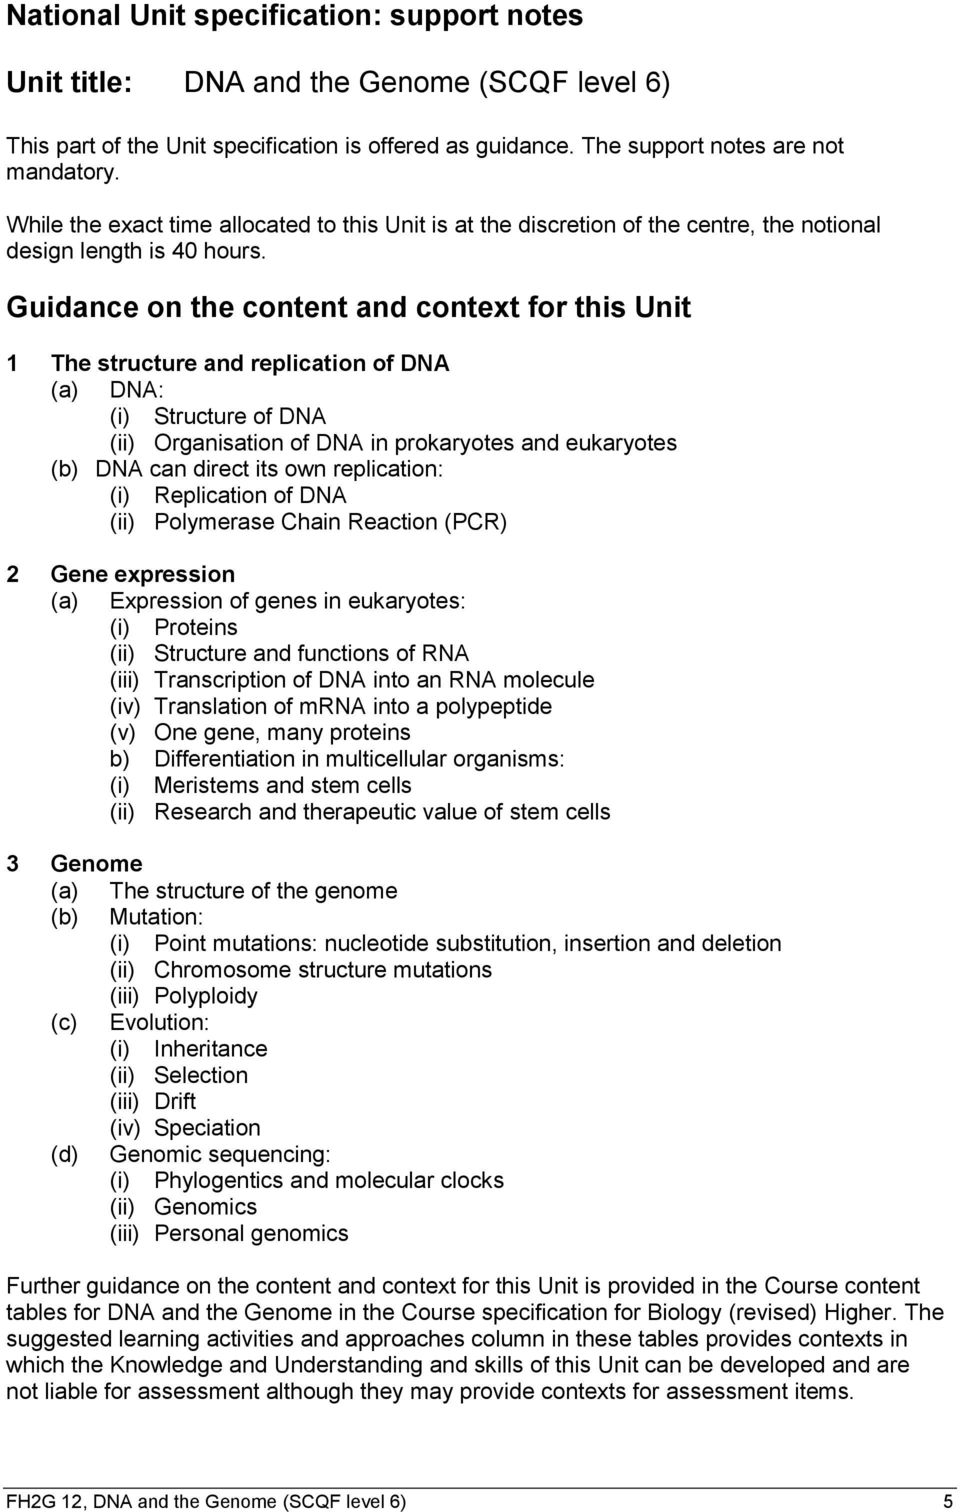 Guidance on the content and context for this Unit 1 The structure and replication of DNA (a) DNA: (i) Structure of DNA (ii) Organisation of DNA in prokaryotes and eukaryotes (b) DNA can direct its